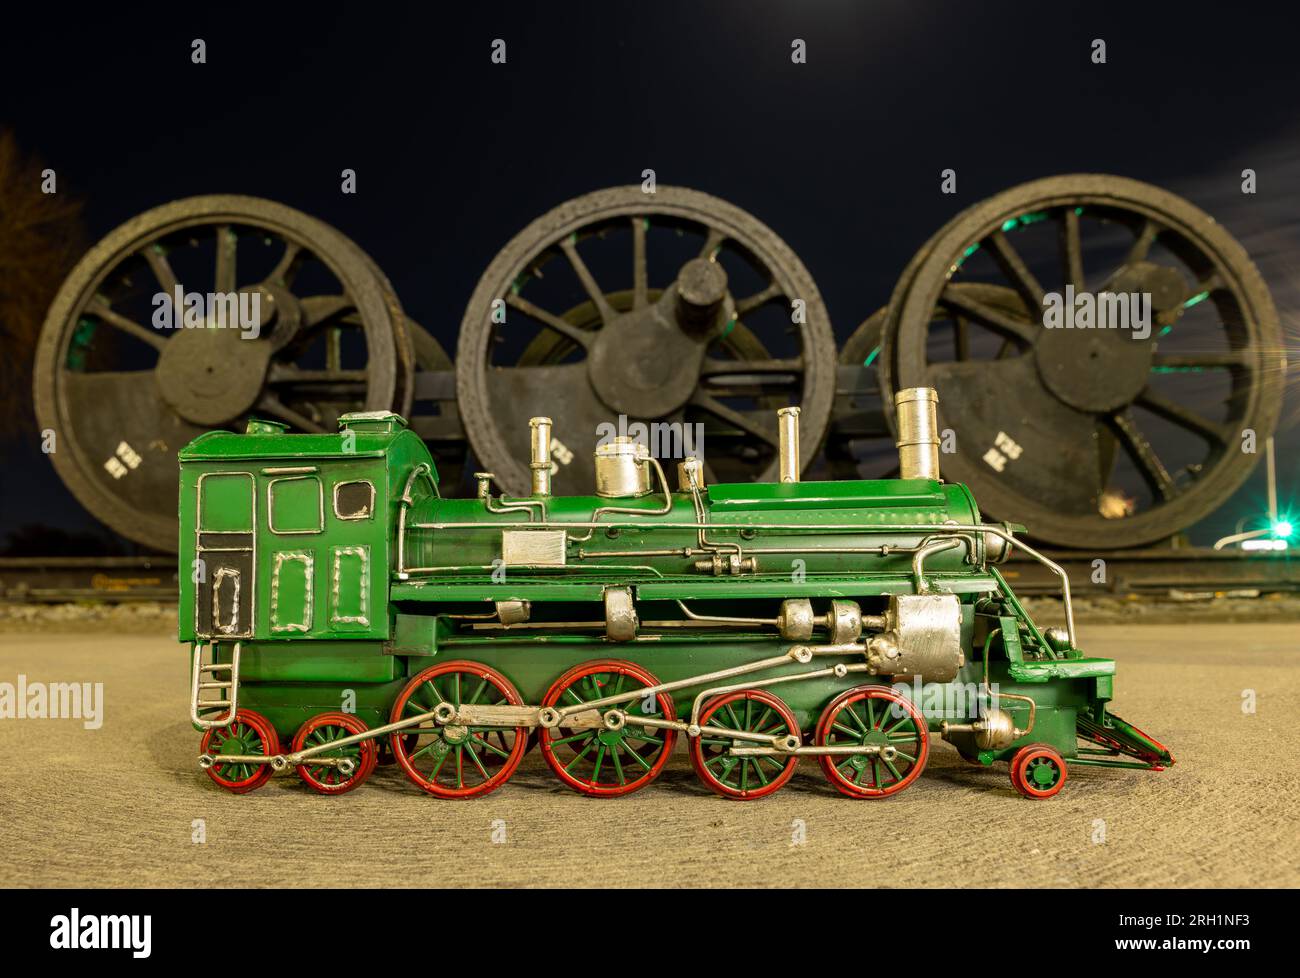 Green steam locomotive model with red wheels in front of a set of old steam locomotive wheels. Stock Photo